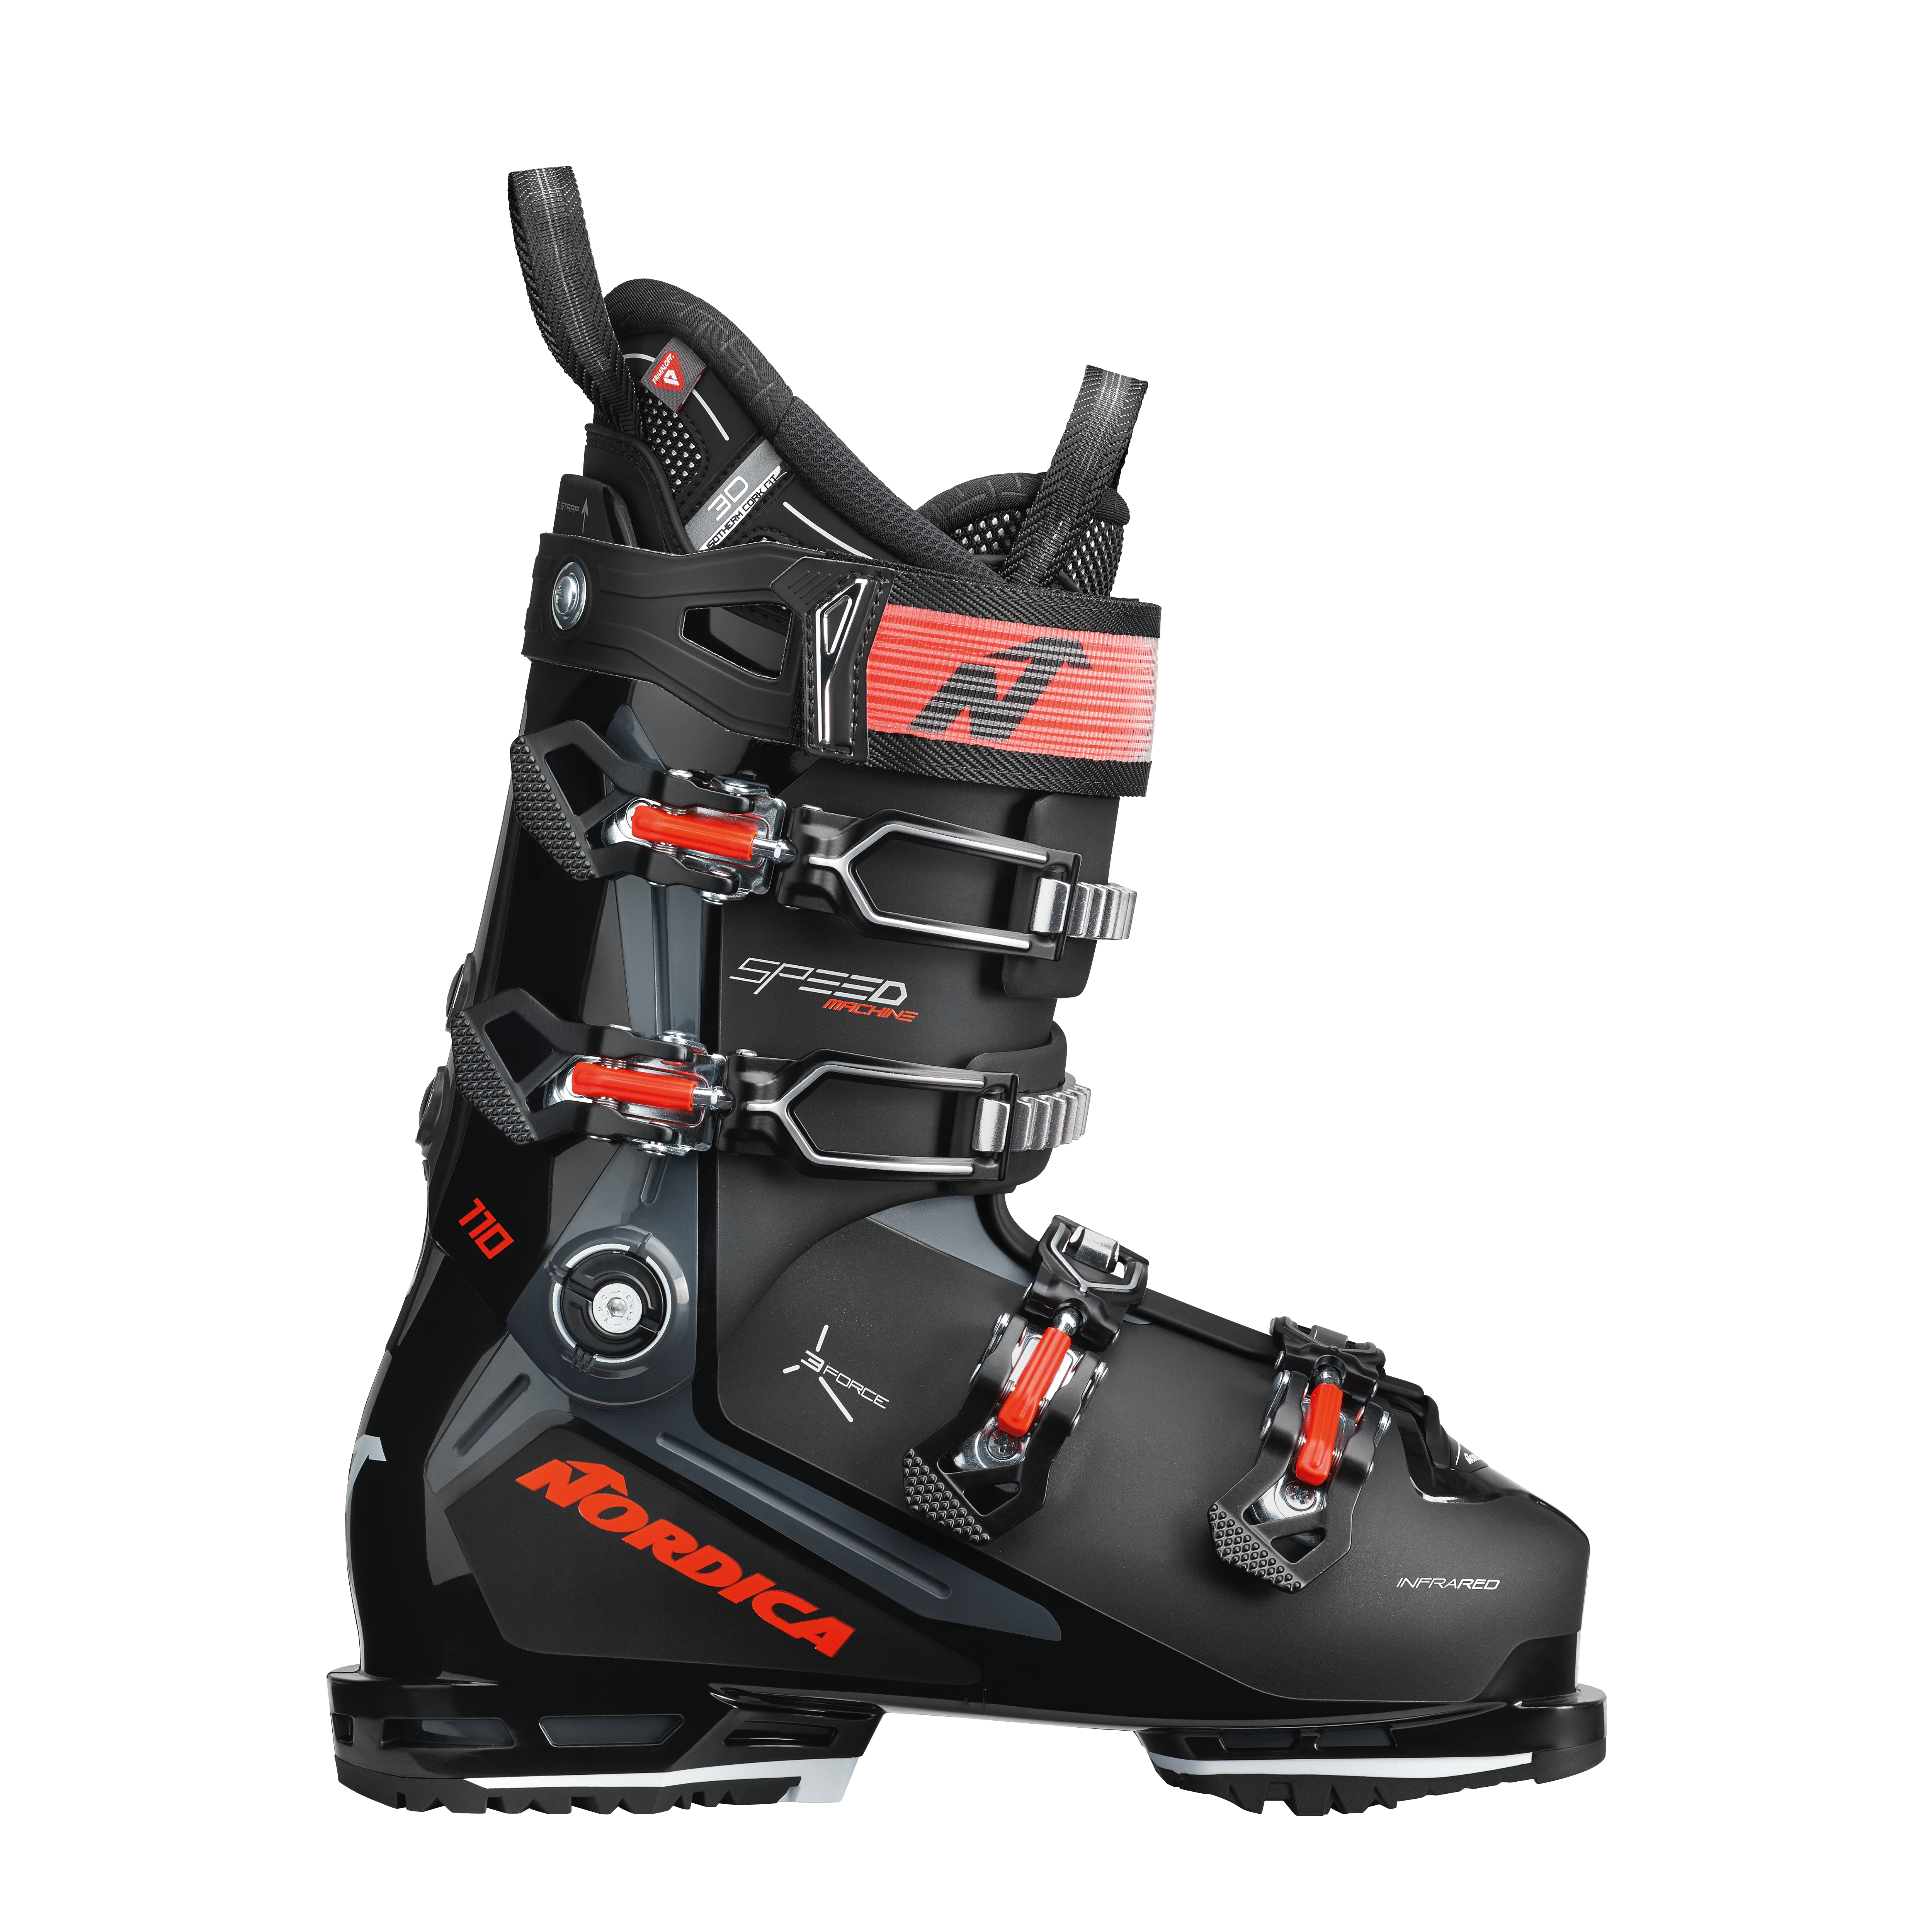 Boots - Nordica - Skis and Boots – Official website